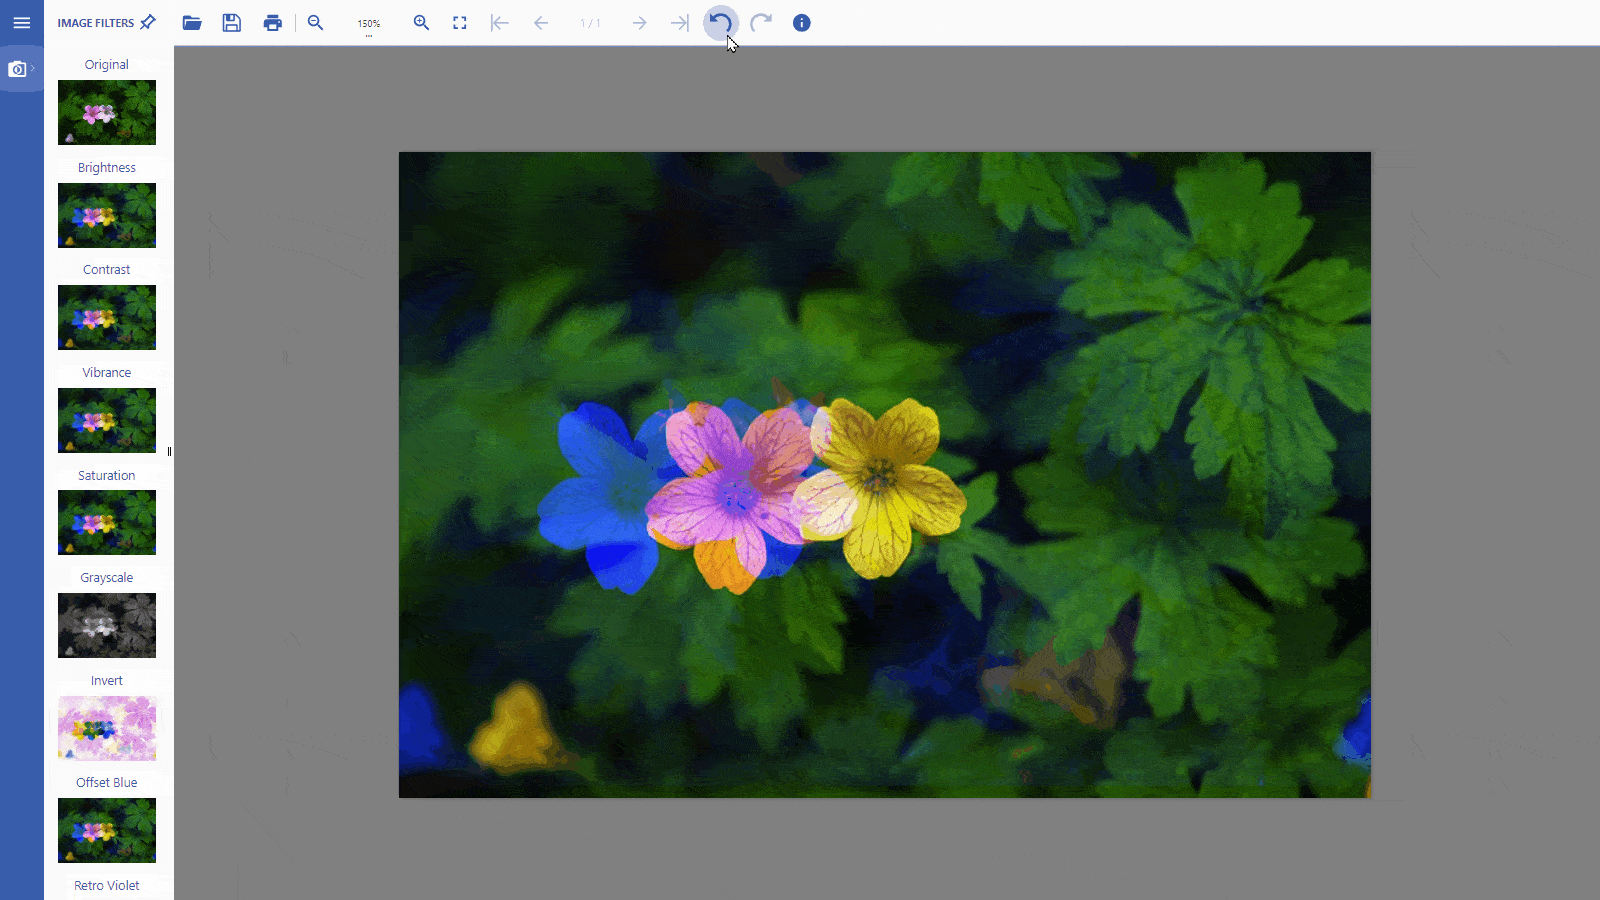 Undo and Redo buttons in JavaScript image viewer